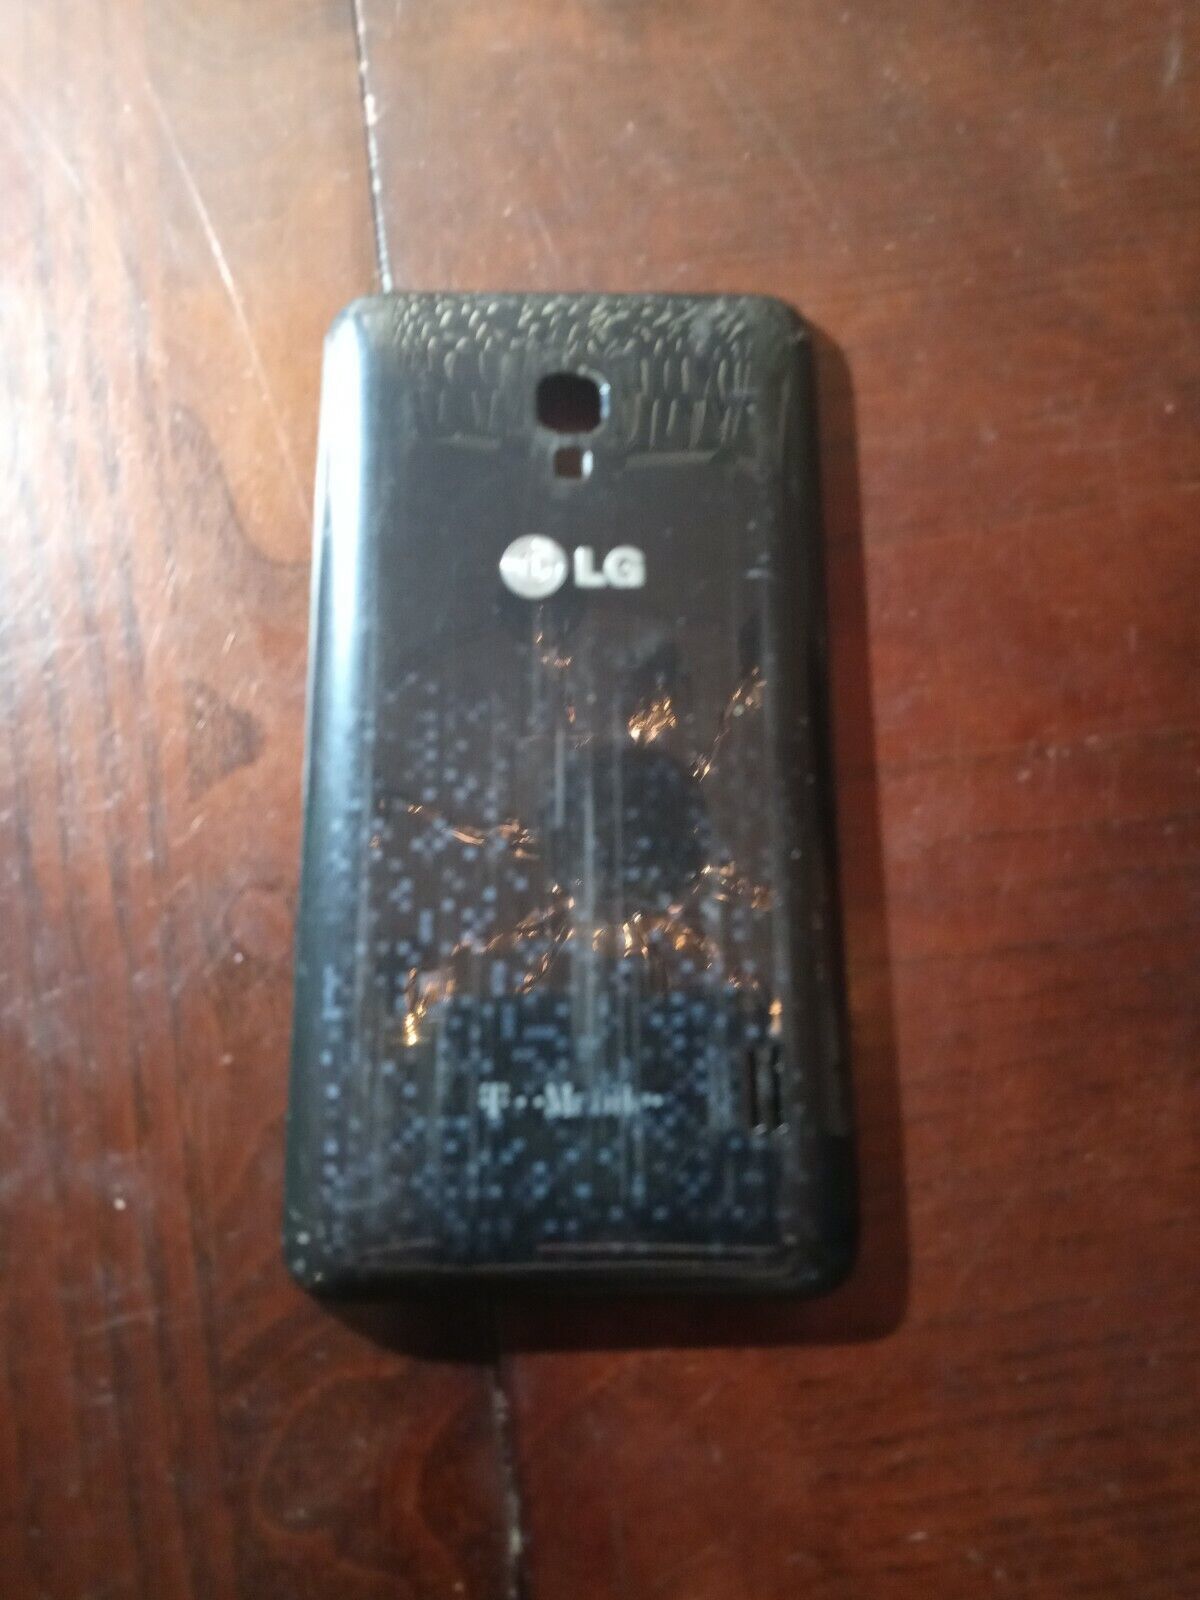 Primary image for LG t mobile phone back